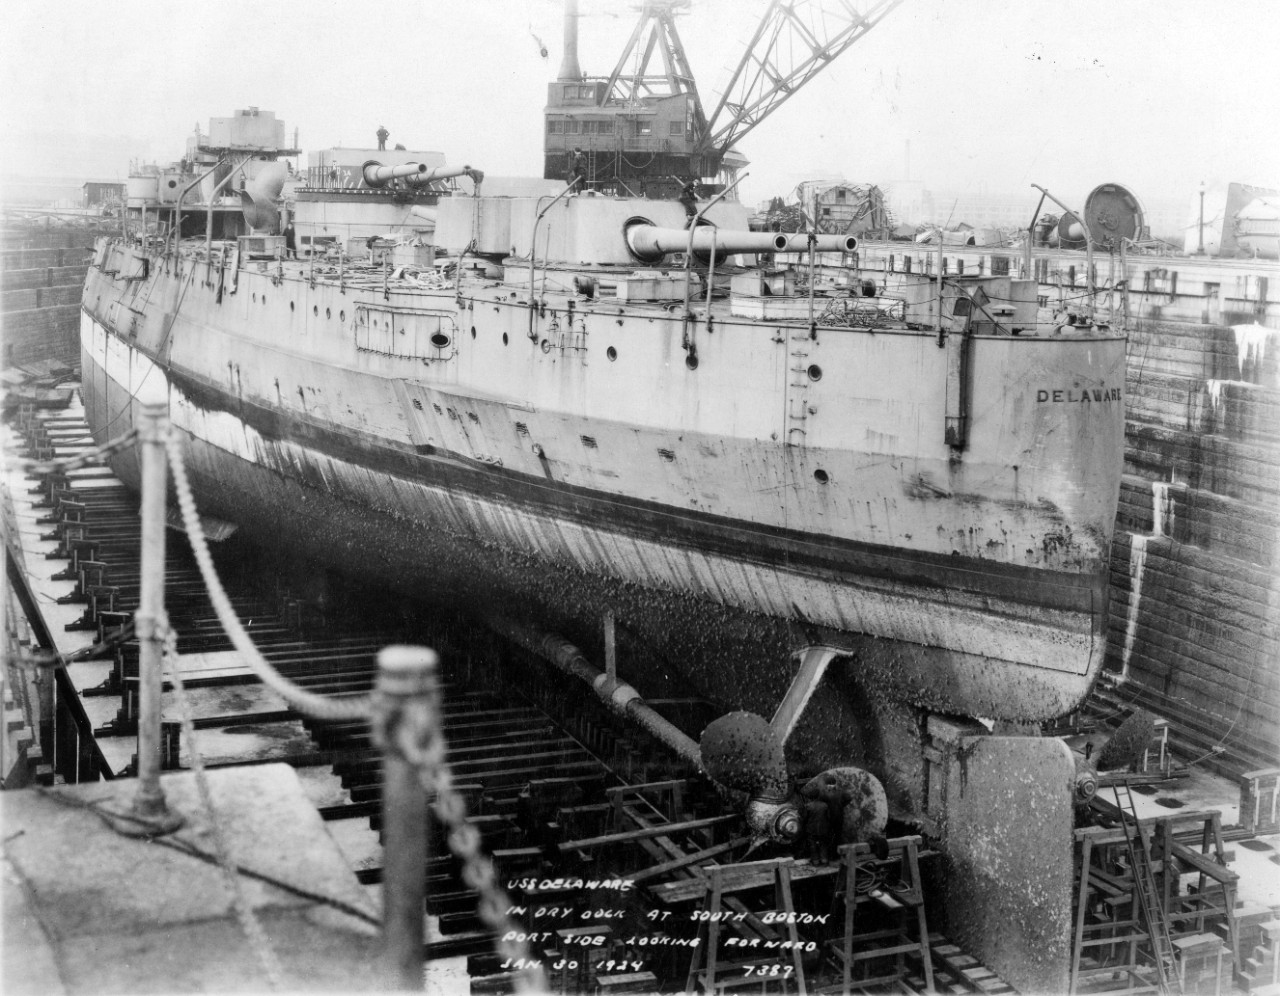 Delaware in dry dock at the South Boston Annex, Boston Navy Yard, Mass., on 30 January 1924. The ship has been stripped in preparation for scrapping. Note propellers, rudder, armor belt and heavy fouling on her underwater hull. (Naval History and...